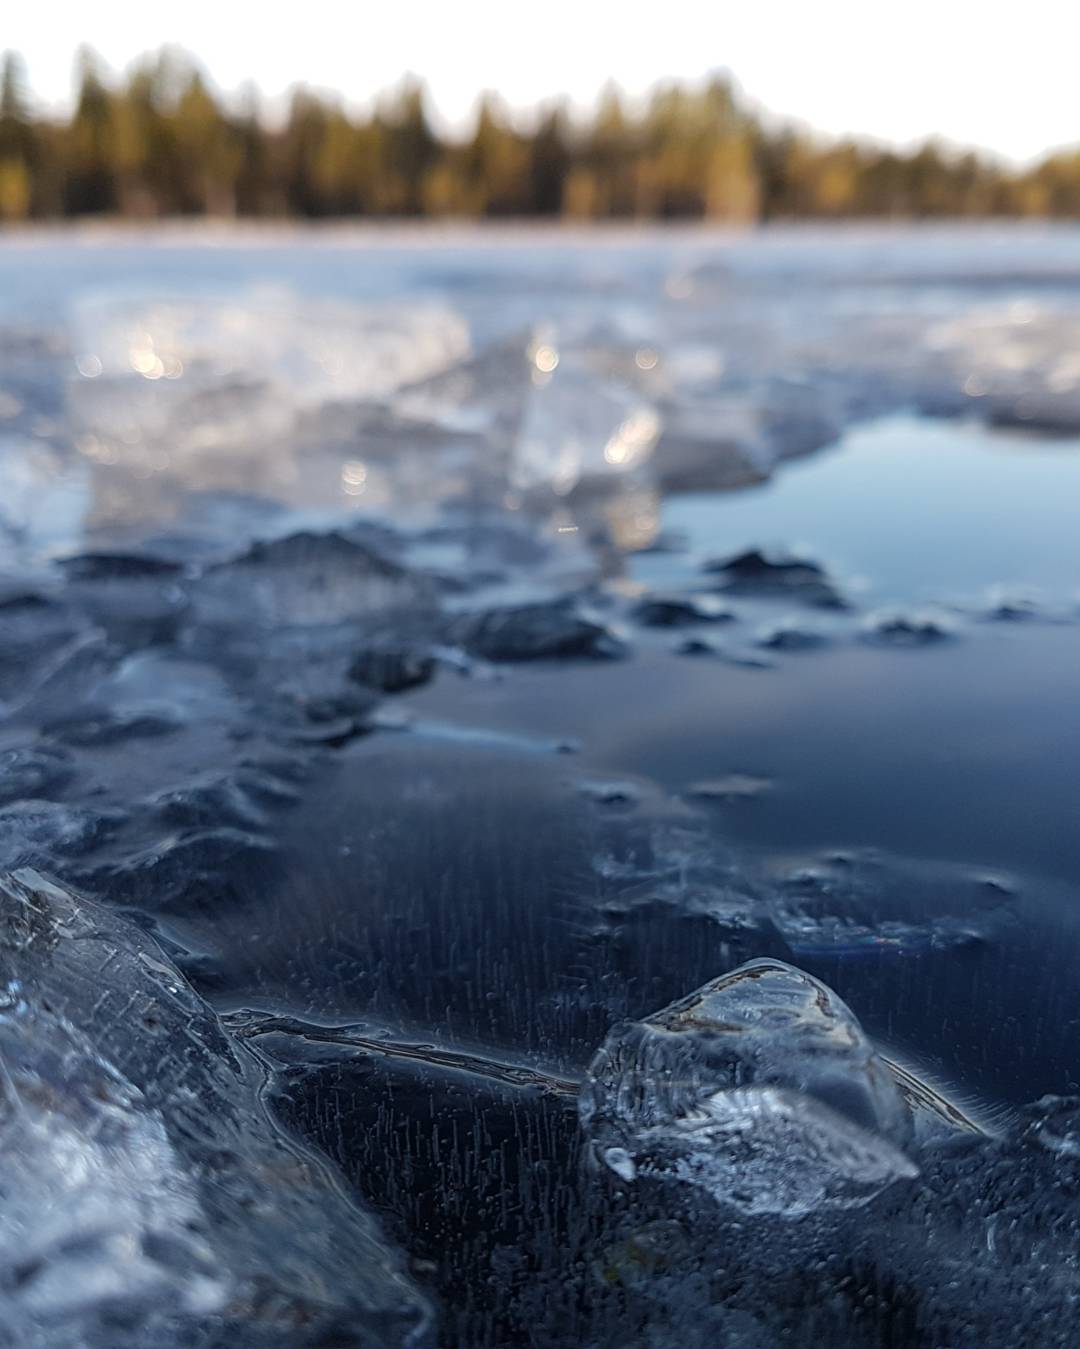 Slowly but surely, the lakes freeze while the winter is comes